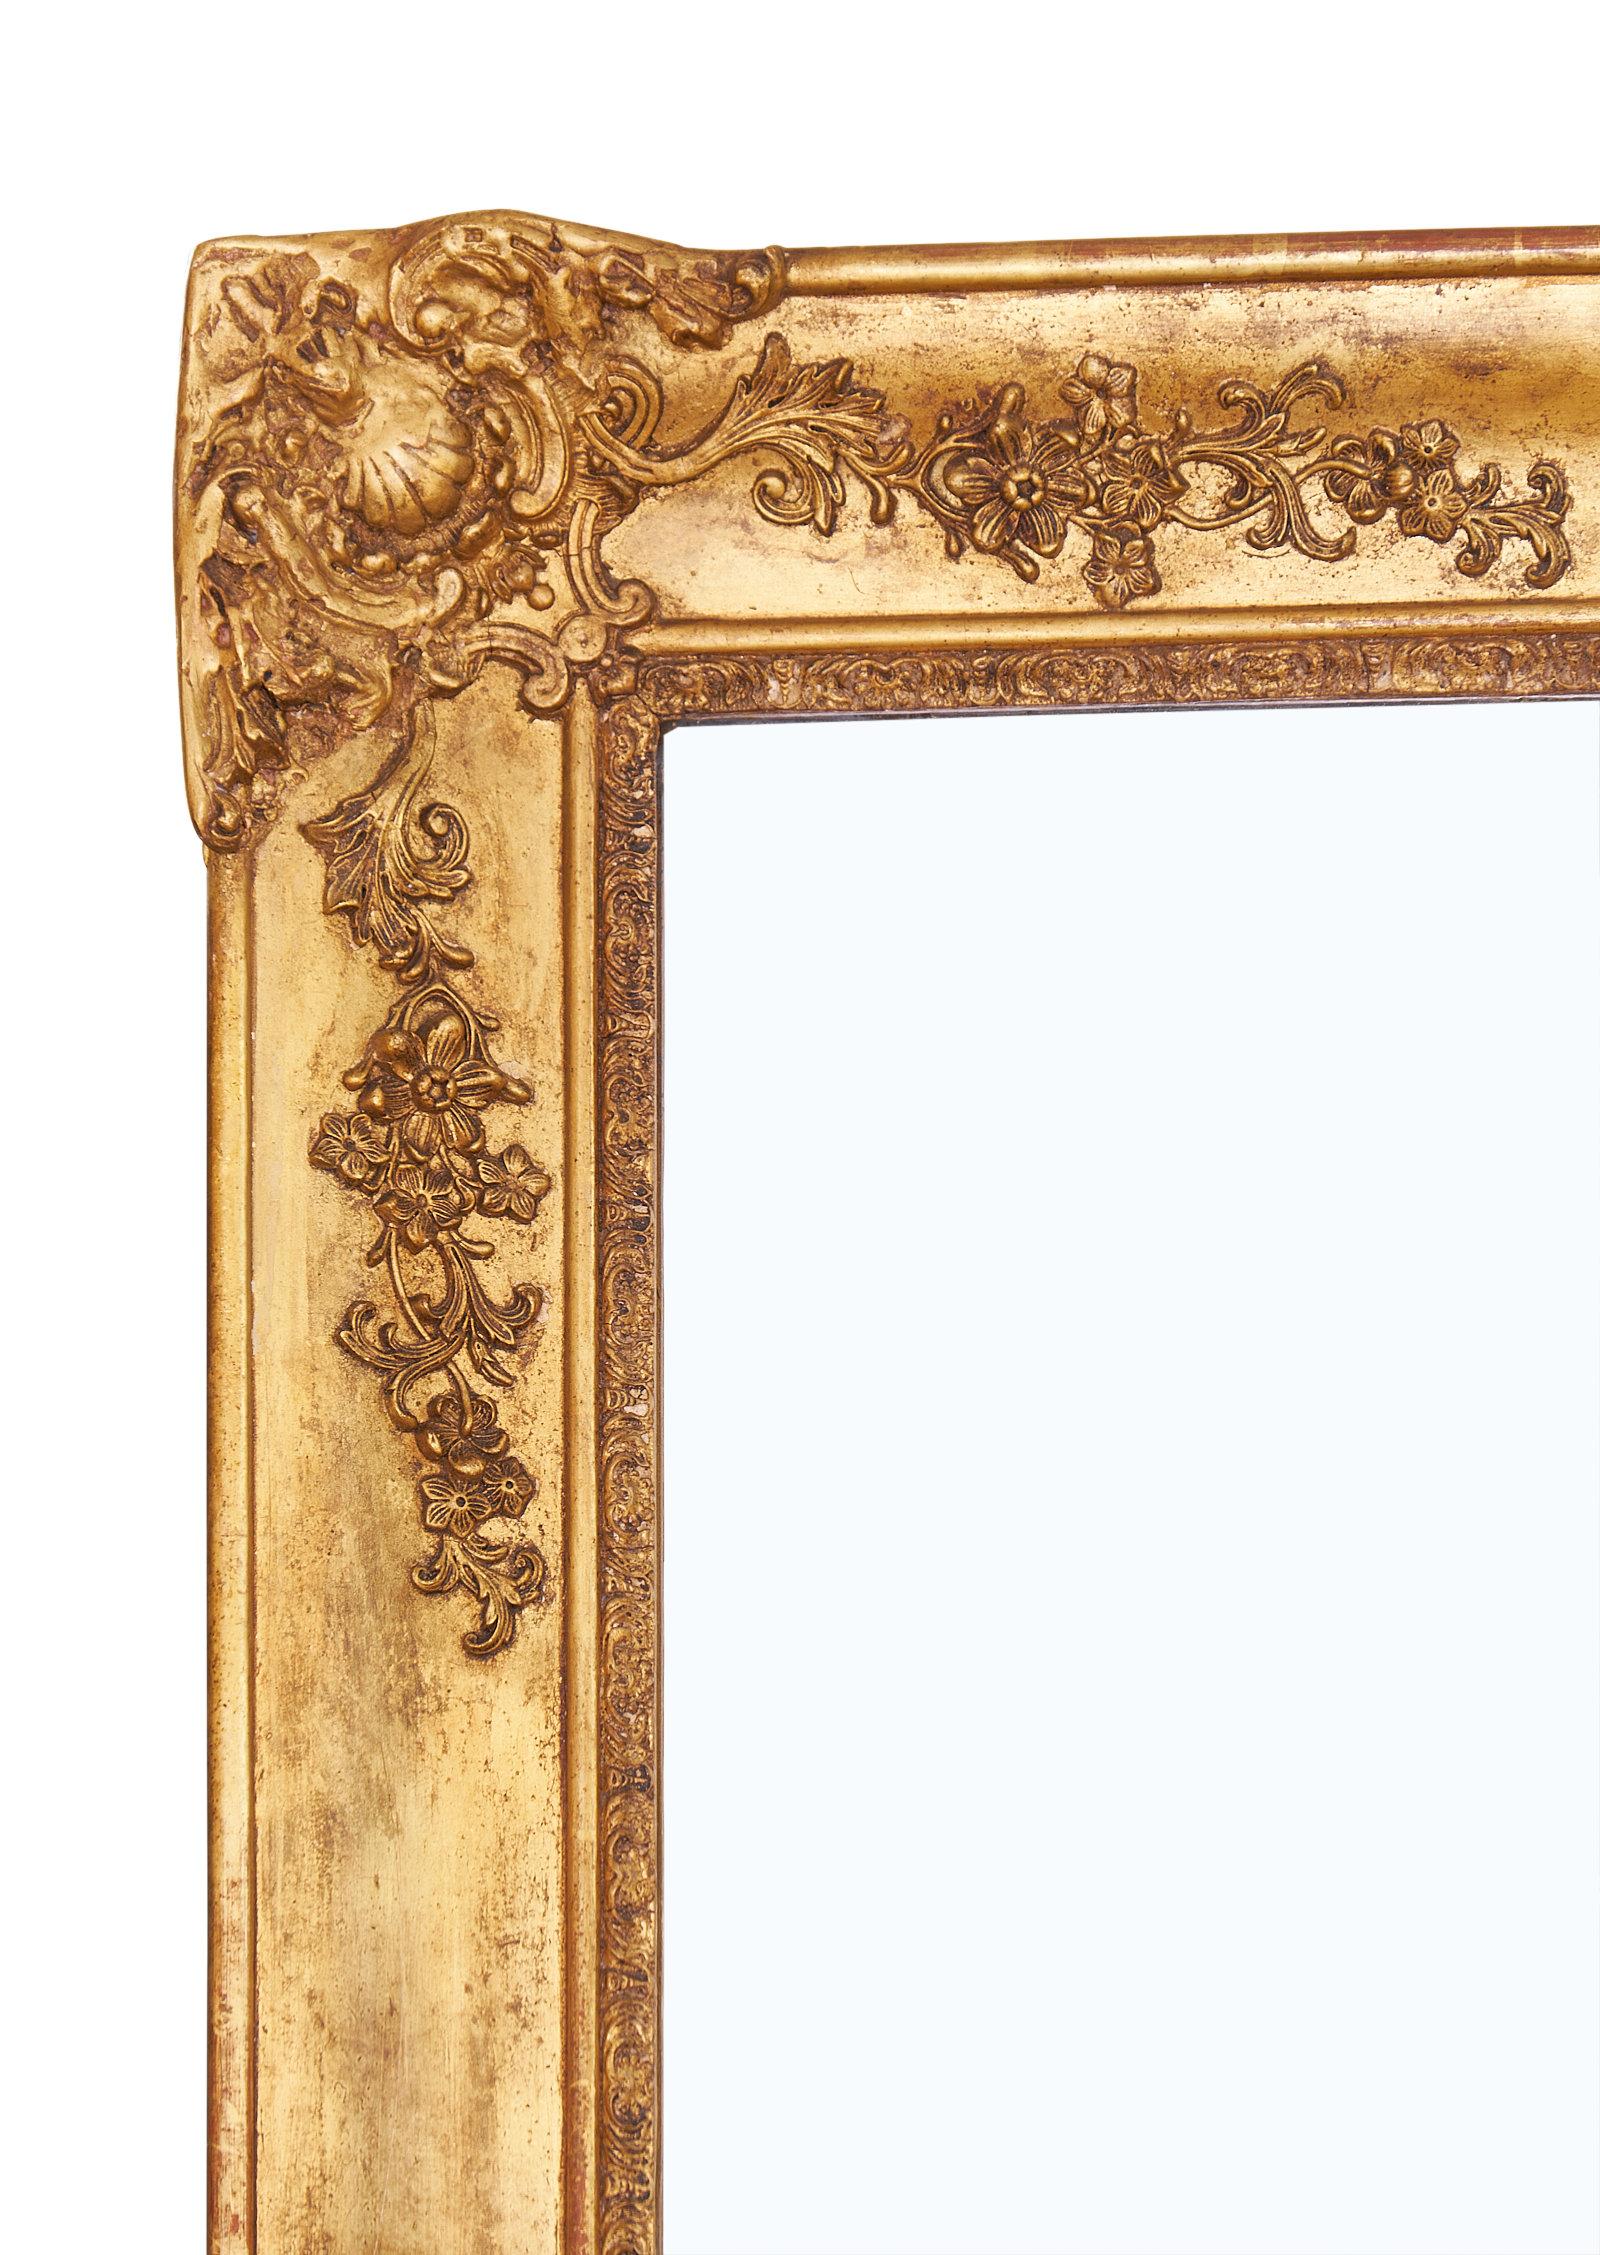 A spectacular large French antique mirror featuring an ornate frame with hand carved godrons and florals. The original mercury mirror is intact. We love the impressive size and quality of this piece!